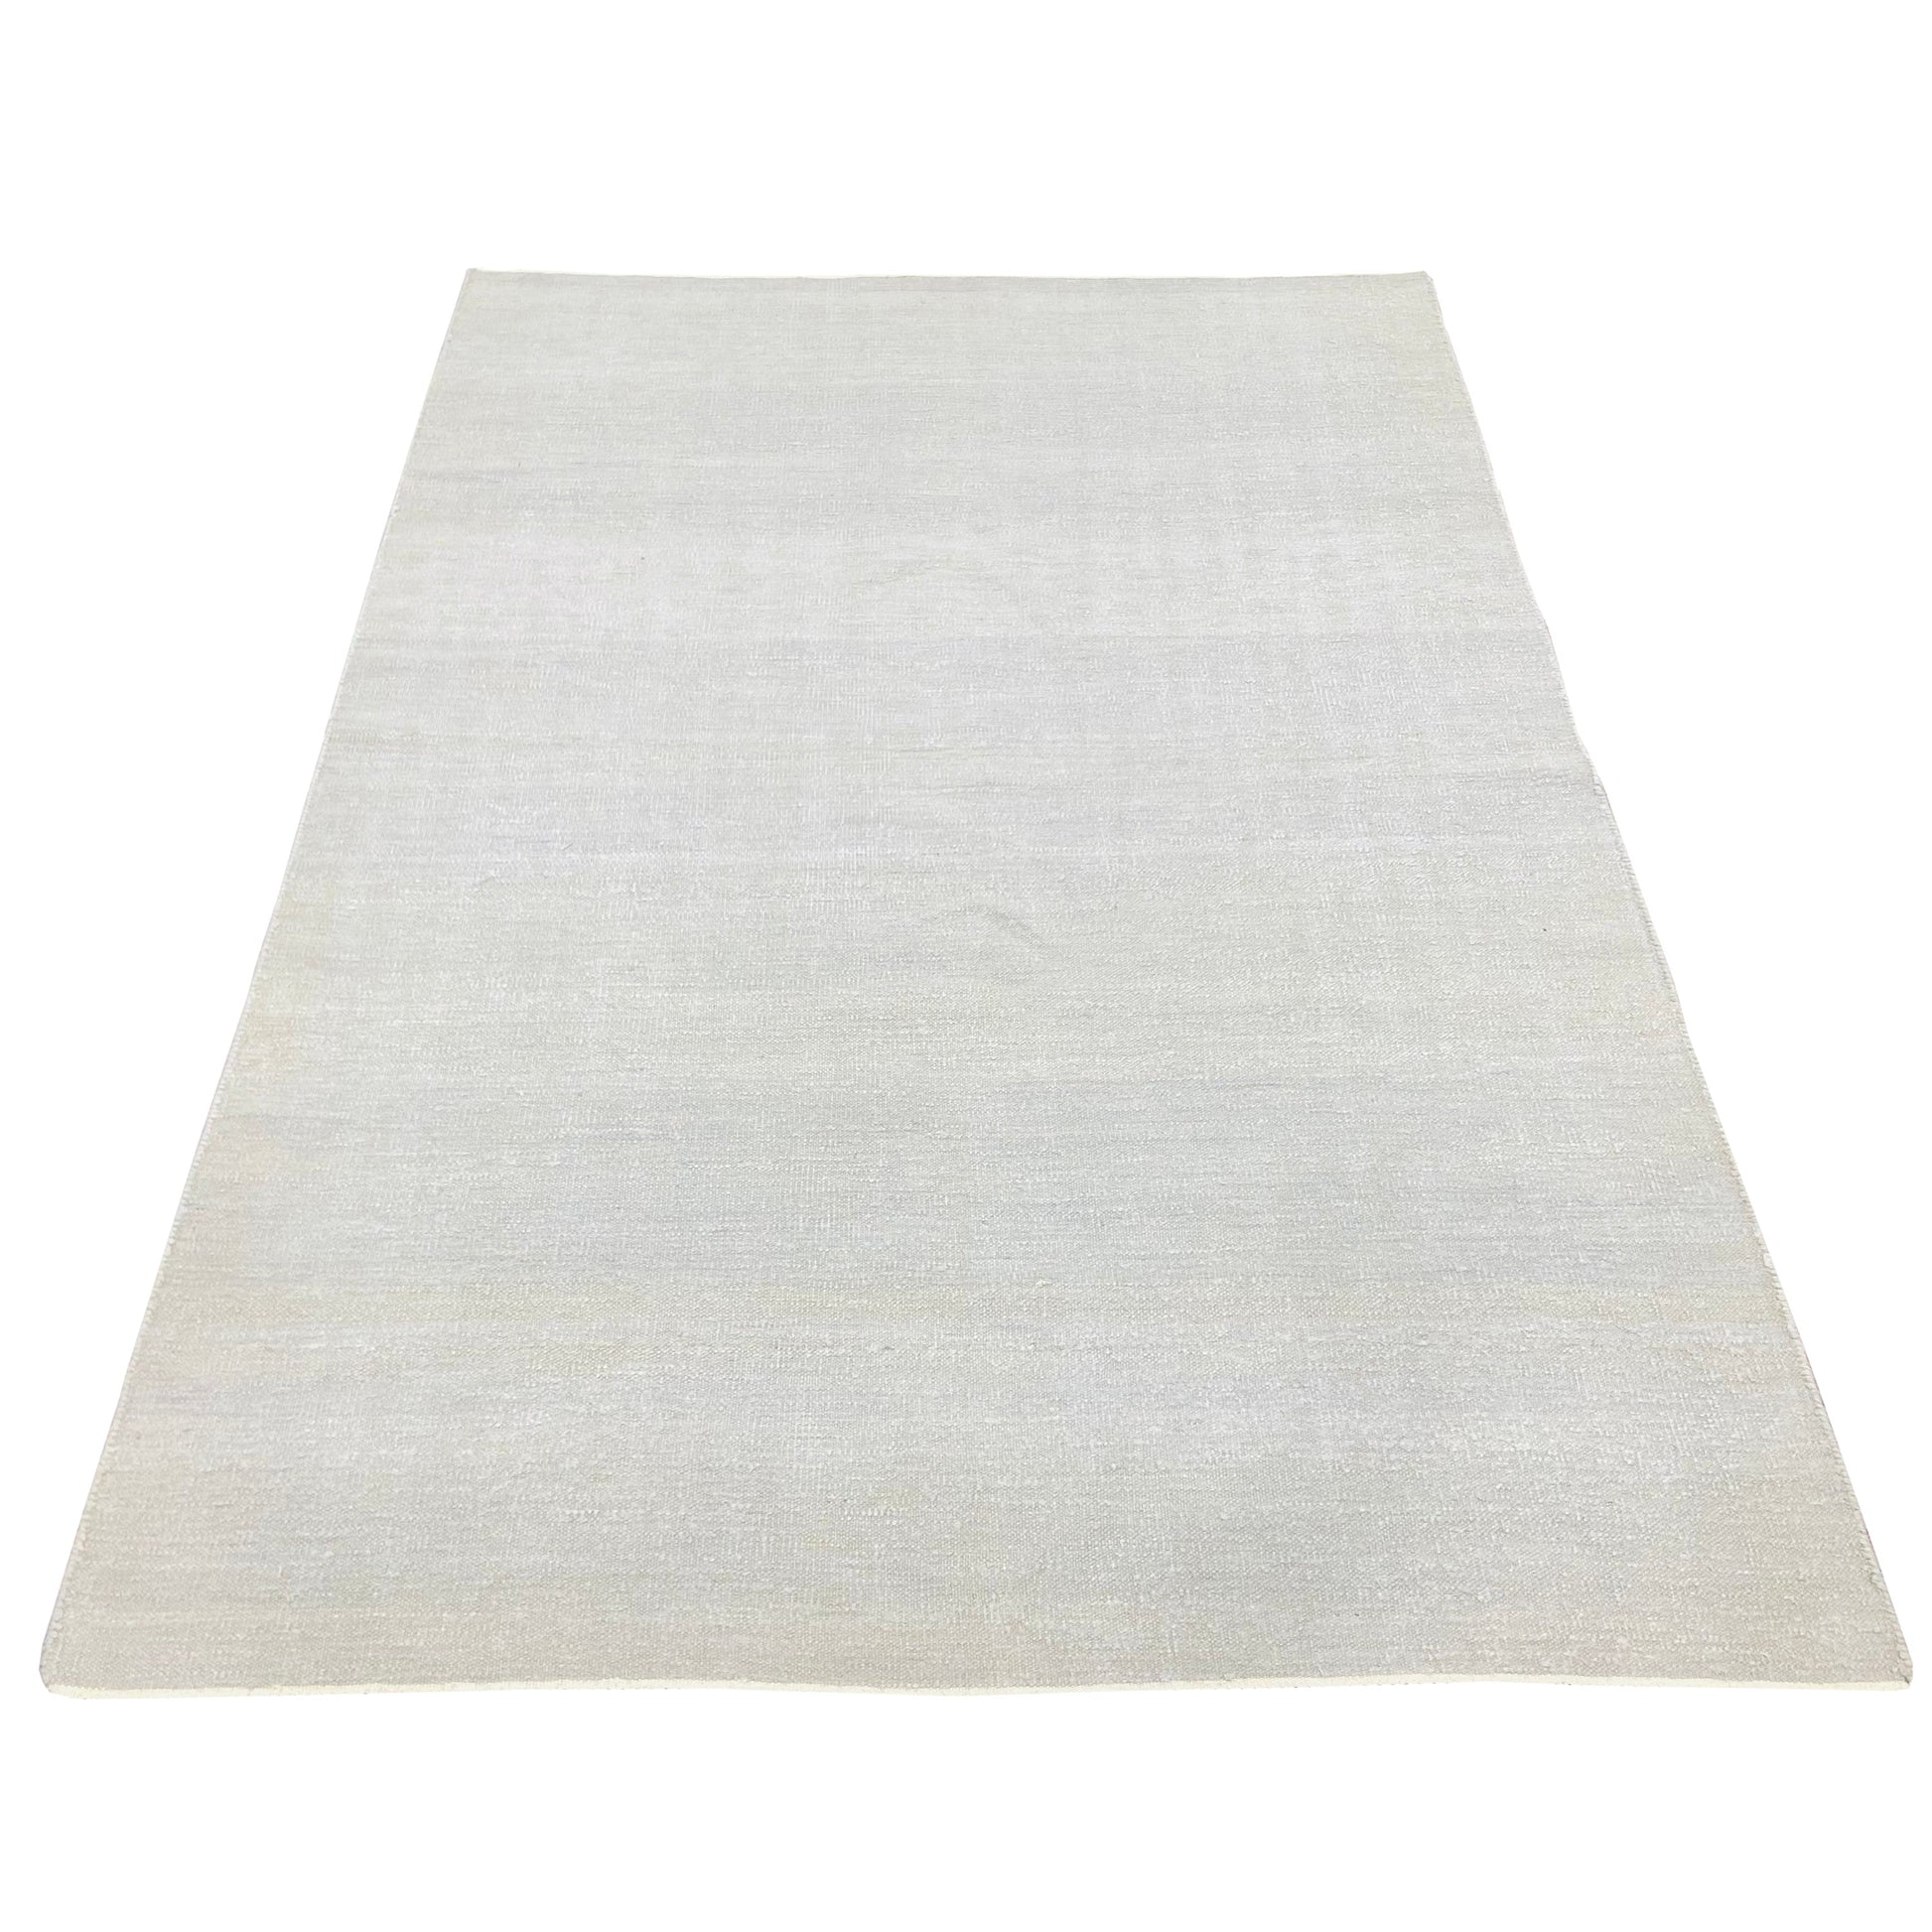 Get trendy with Ivory Silk Plain Grey Kilim 3.11x5.11ft 119x179Cms - Kilims available at Jaipur Oriental Rugs. Grab yours for $99.00 today!